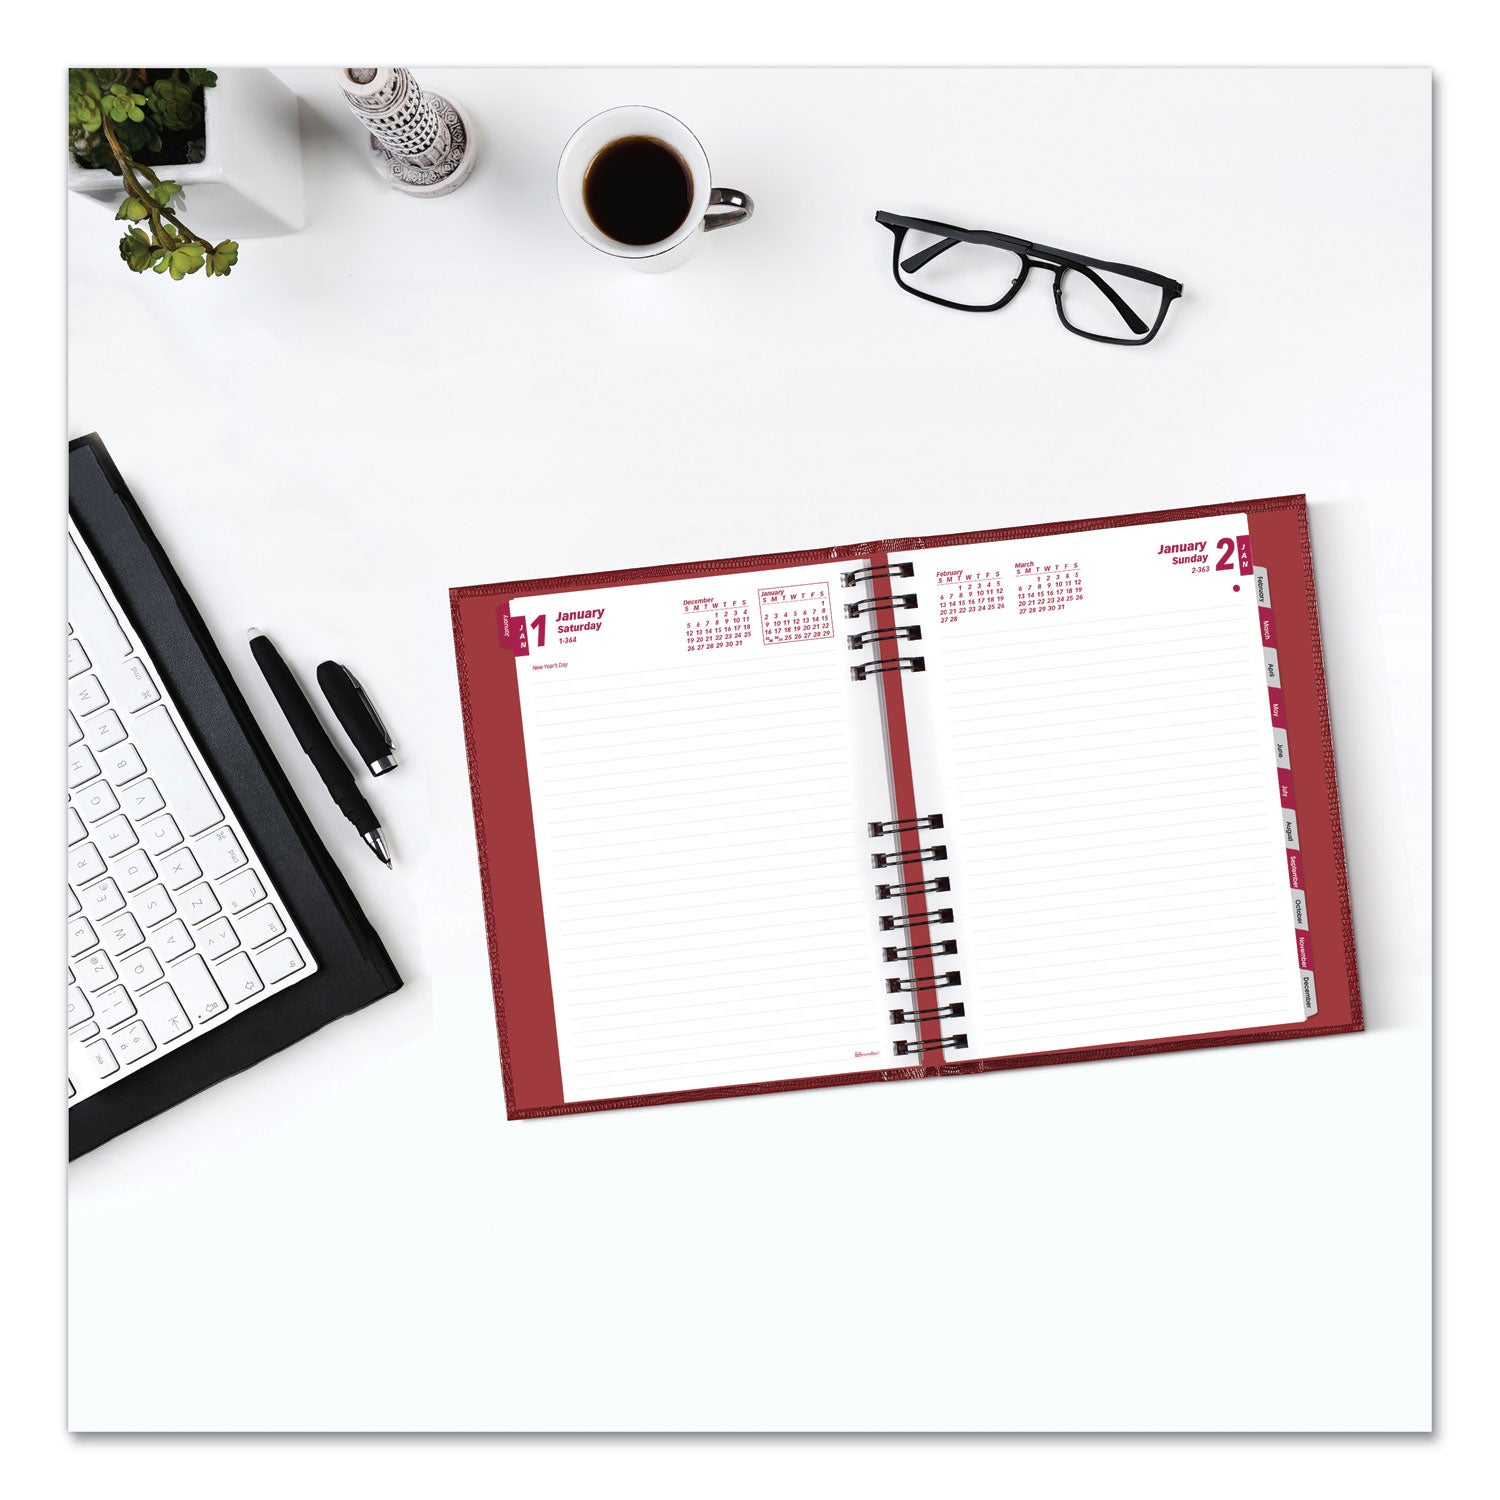 coilpro-ruled-daily-planner-825-x-575-red-cover-12-month-jan-to-dec-2024_redcb389cred - 4